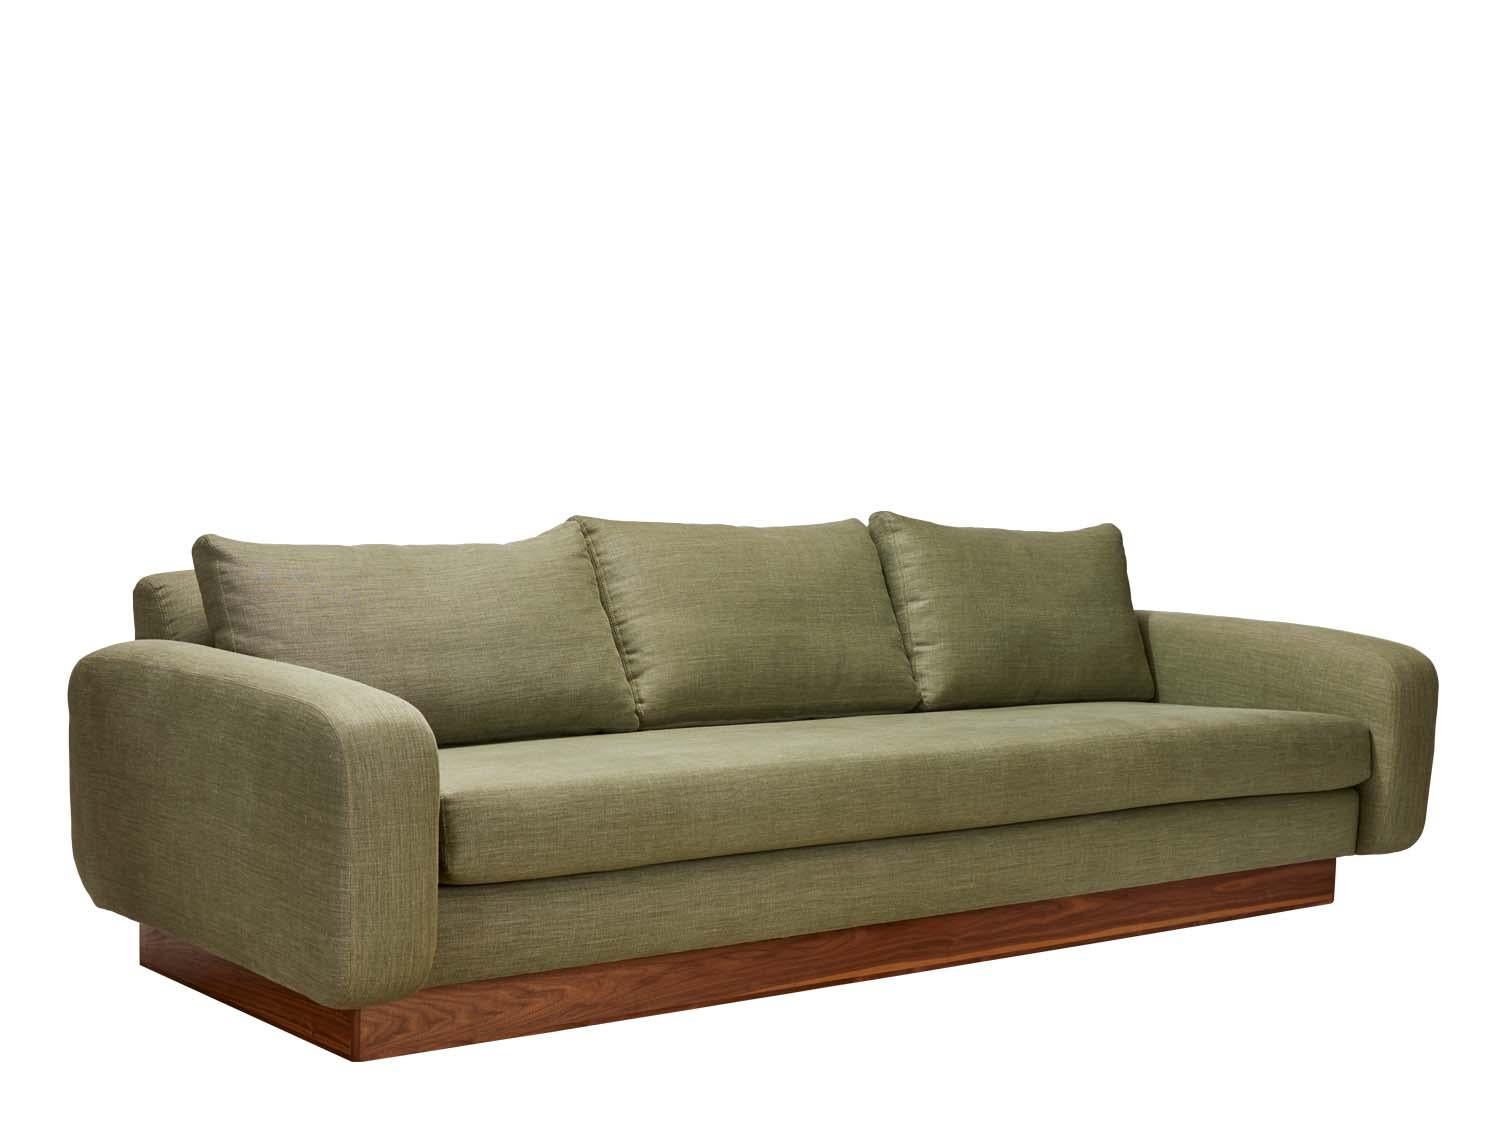 The Mesa sofa is a fully upholstered sofa that features a walnut or oak plinth base.

The Lawson-Fenning Collection is designed and handmade in Los Angeles, California. Reach out to discover what options are currently in stock.